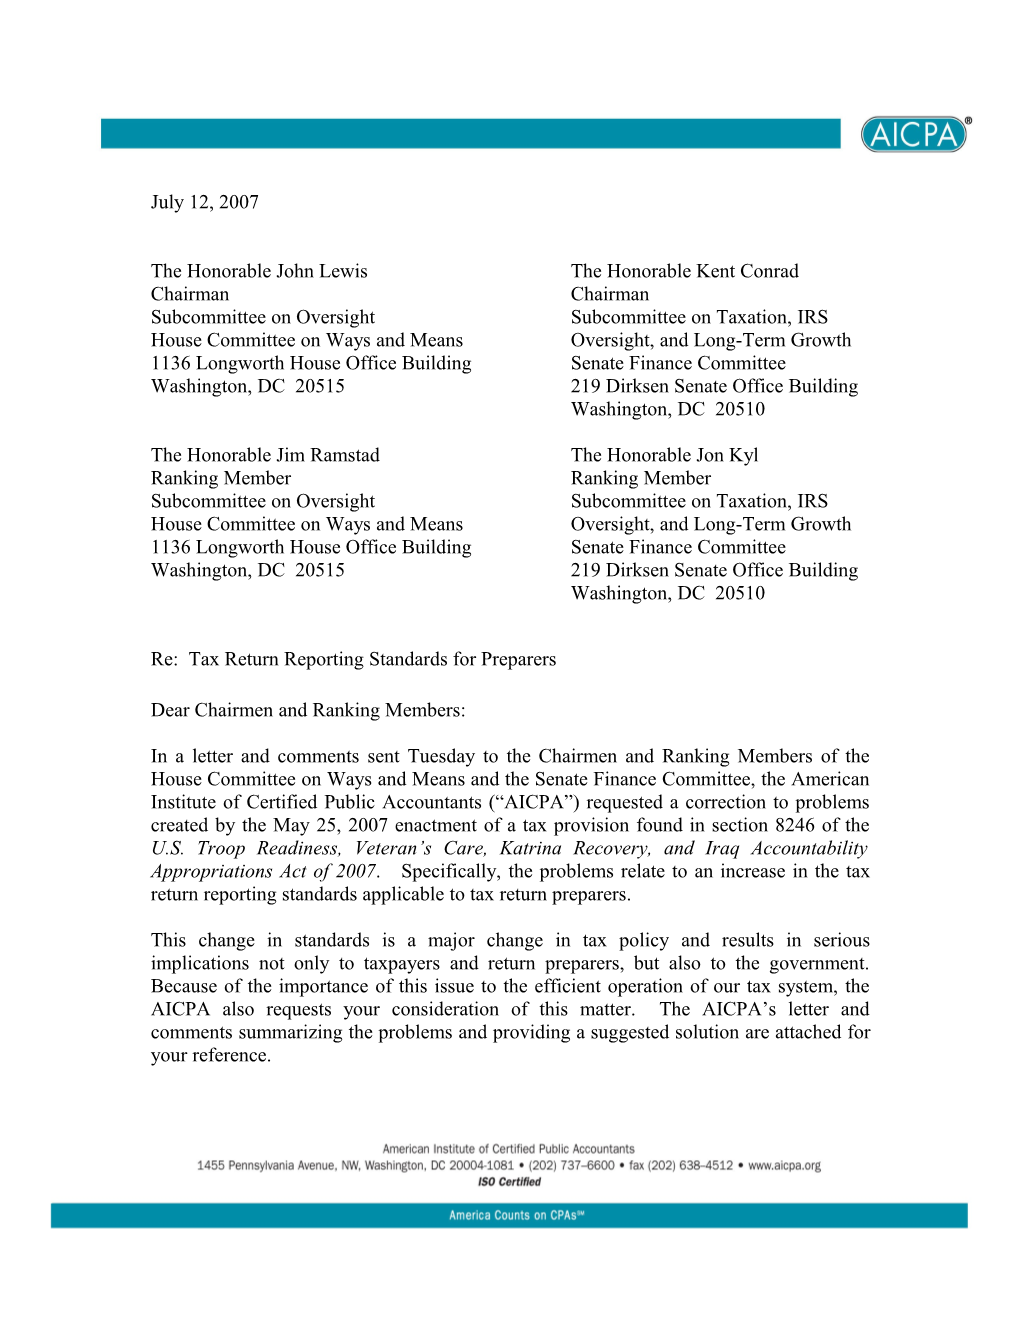 AICPA Letter to House and Senate Oversight Subcommittees Urging Revisions to the Newly